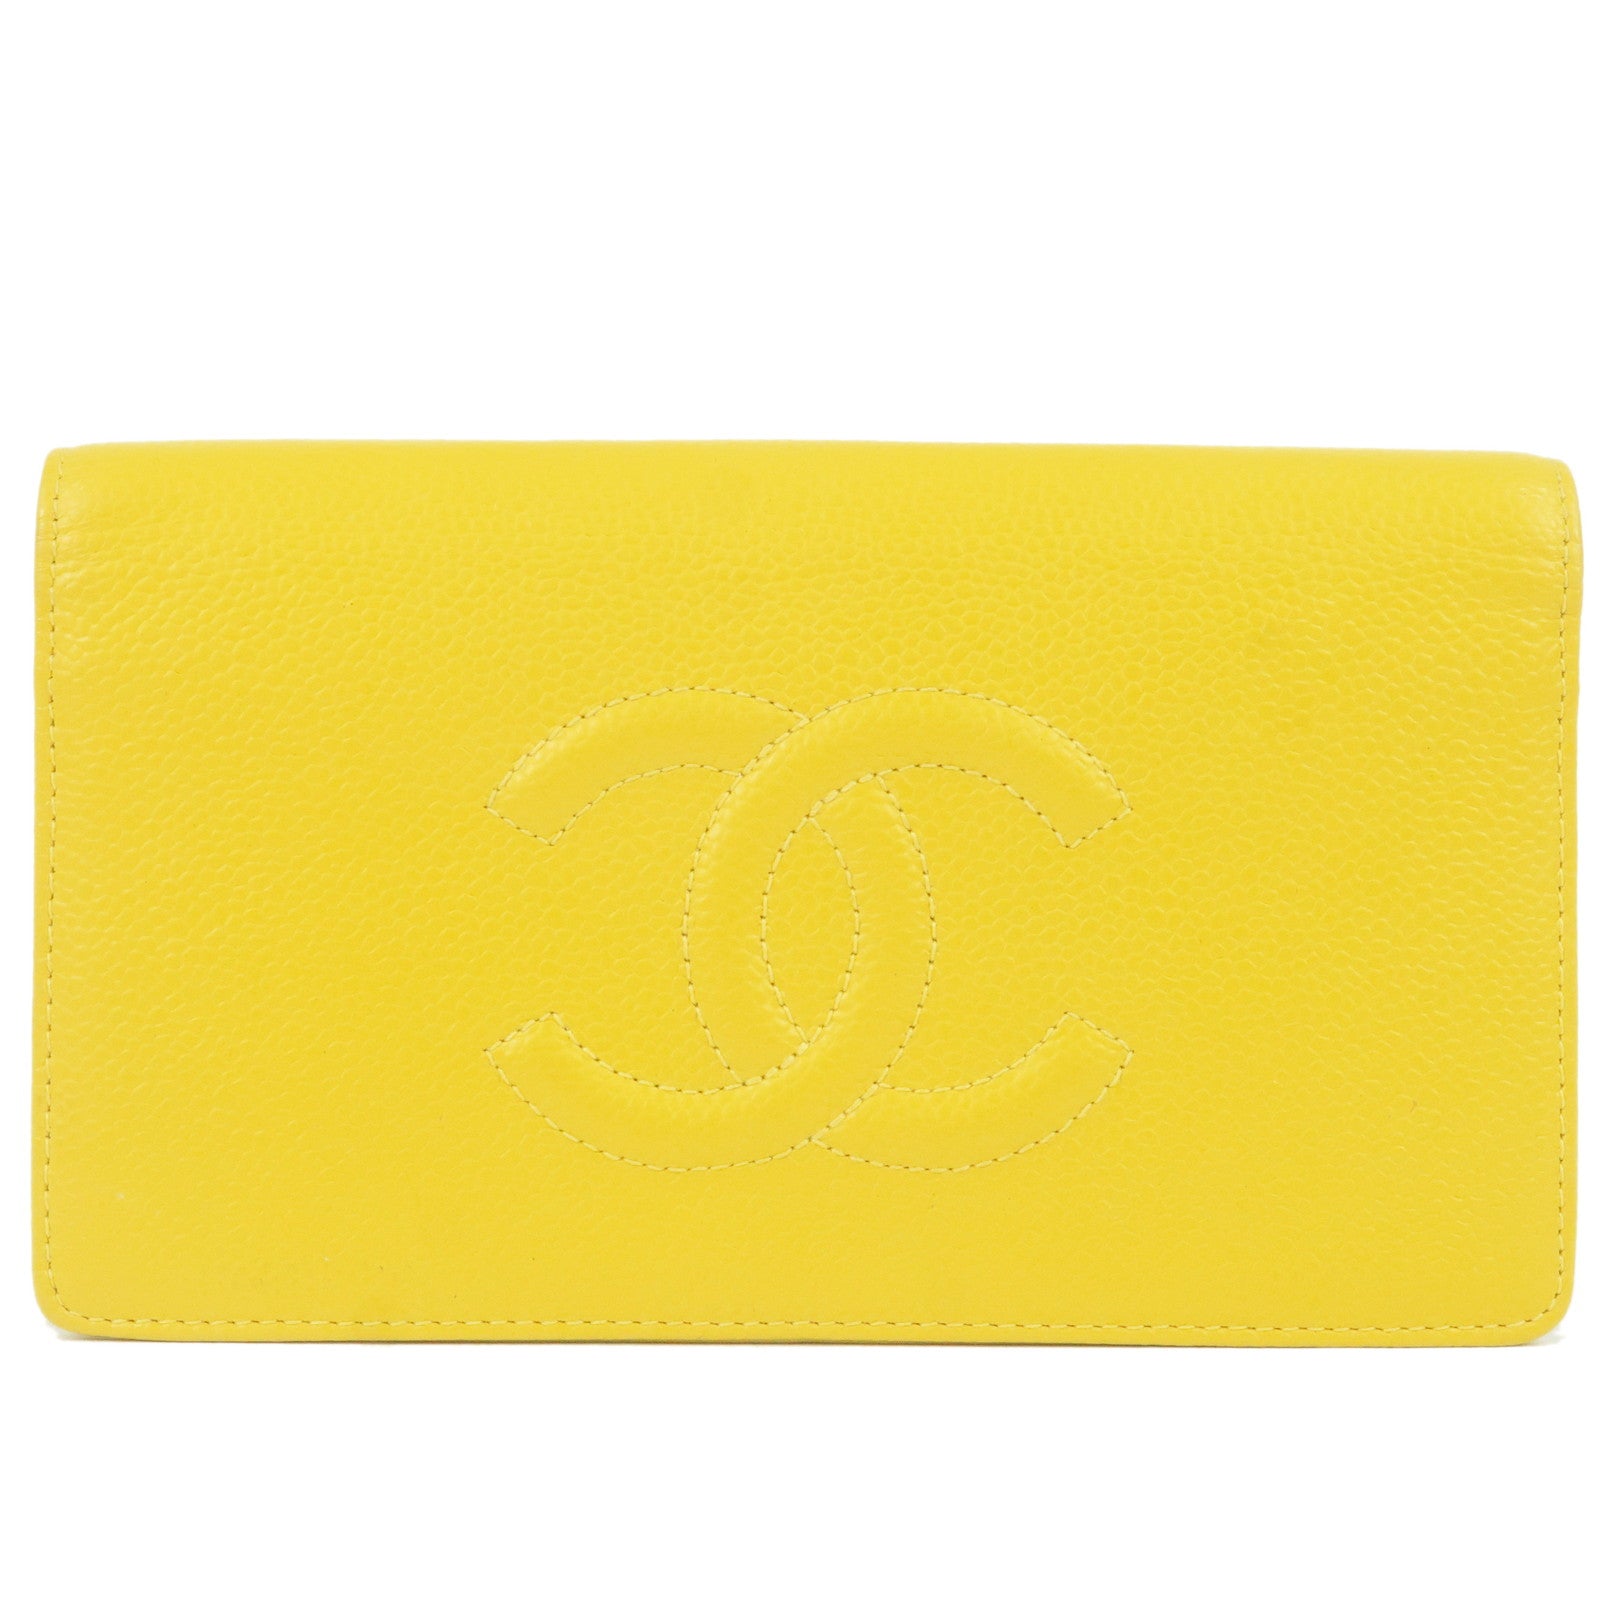 Long - ep_vintage luxury Store - Along with past collaborators such as  fashion house Chanel - Wallet - Yellow - Caviar - A48651 – dct - Fold - Bi  - CHANEL - Skin